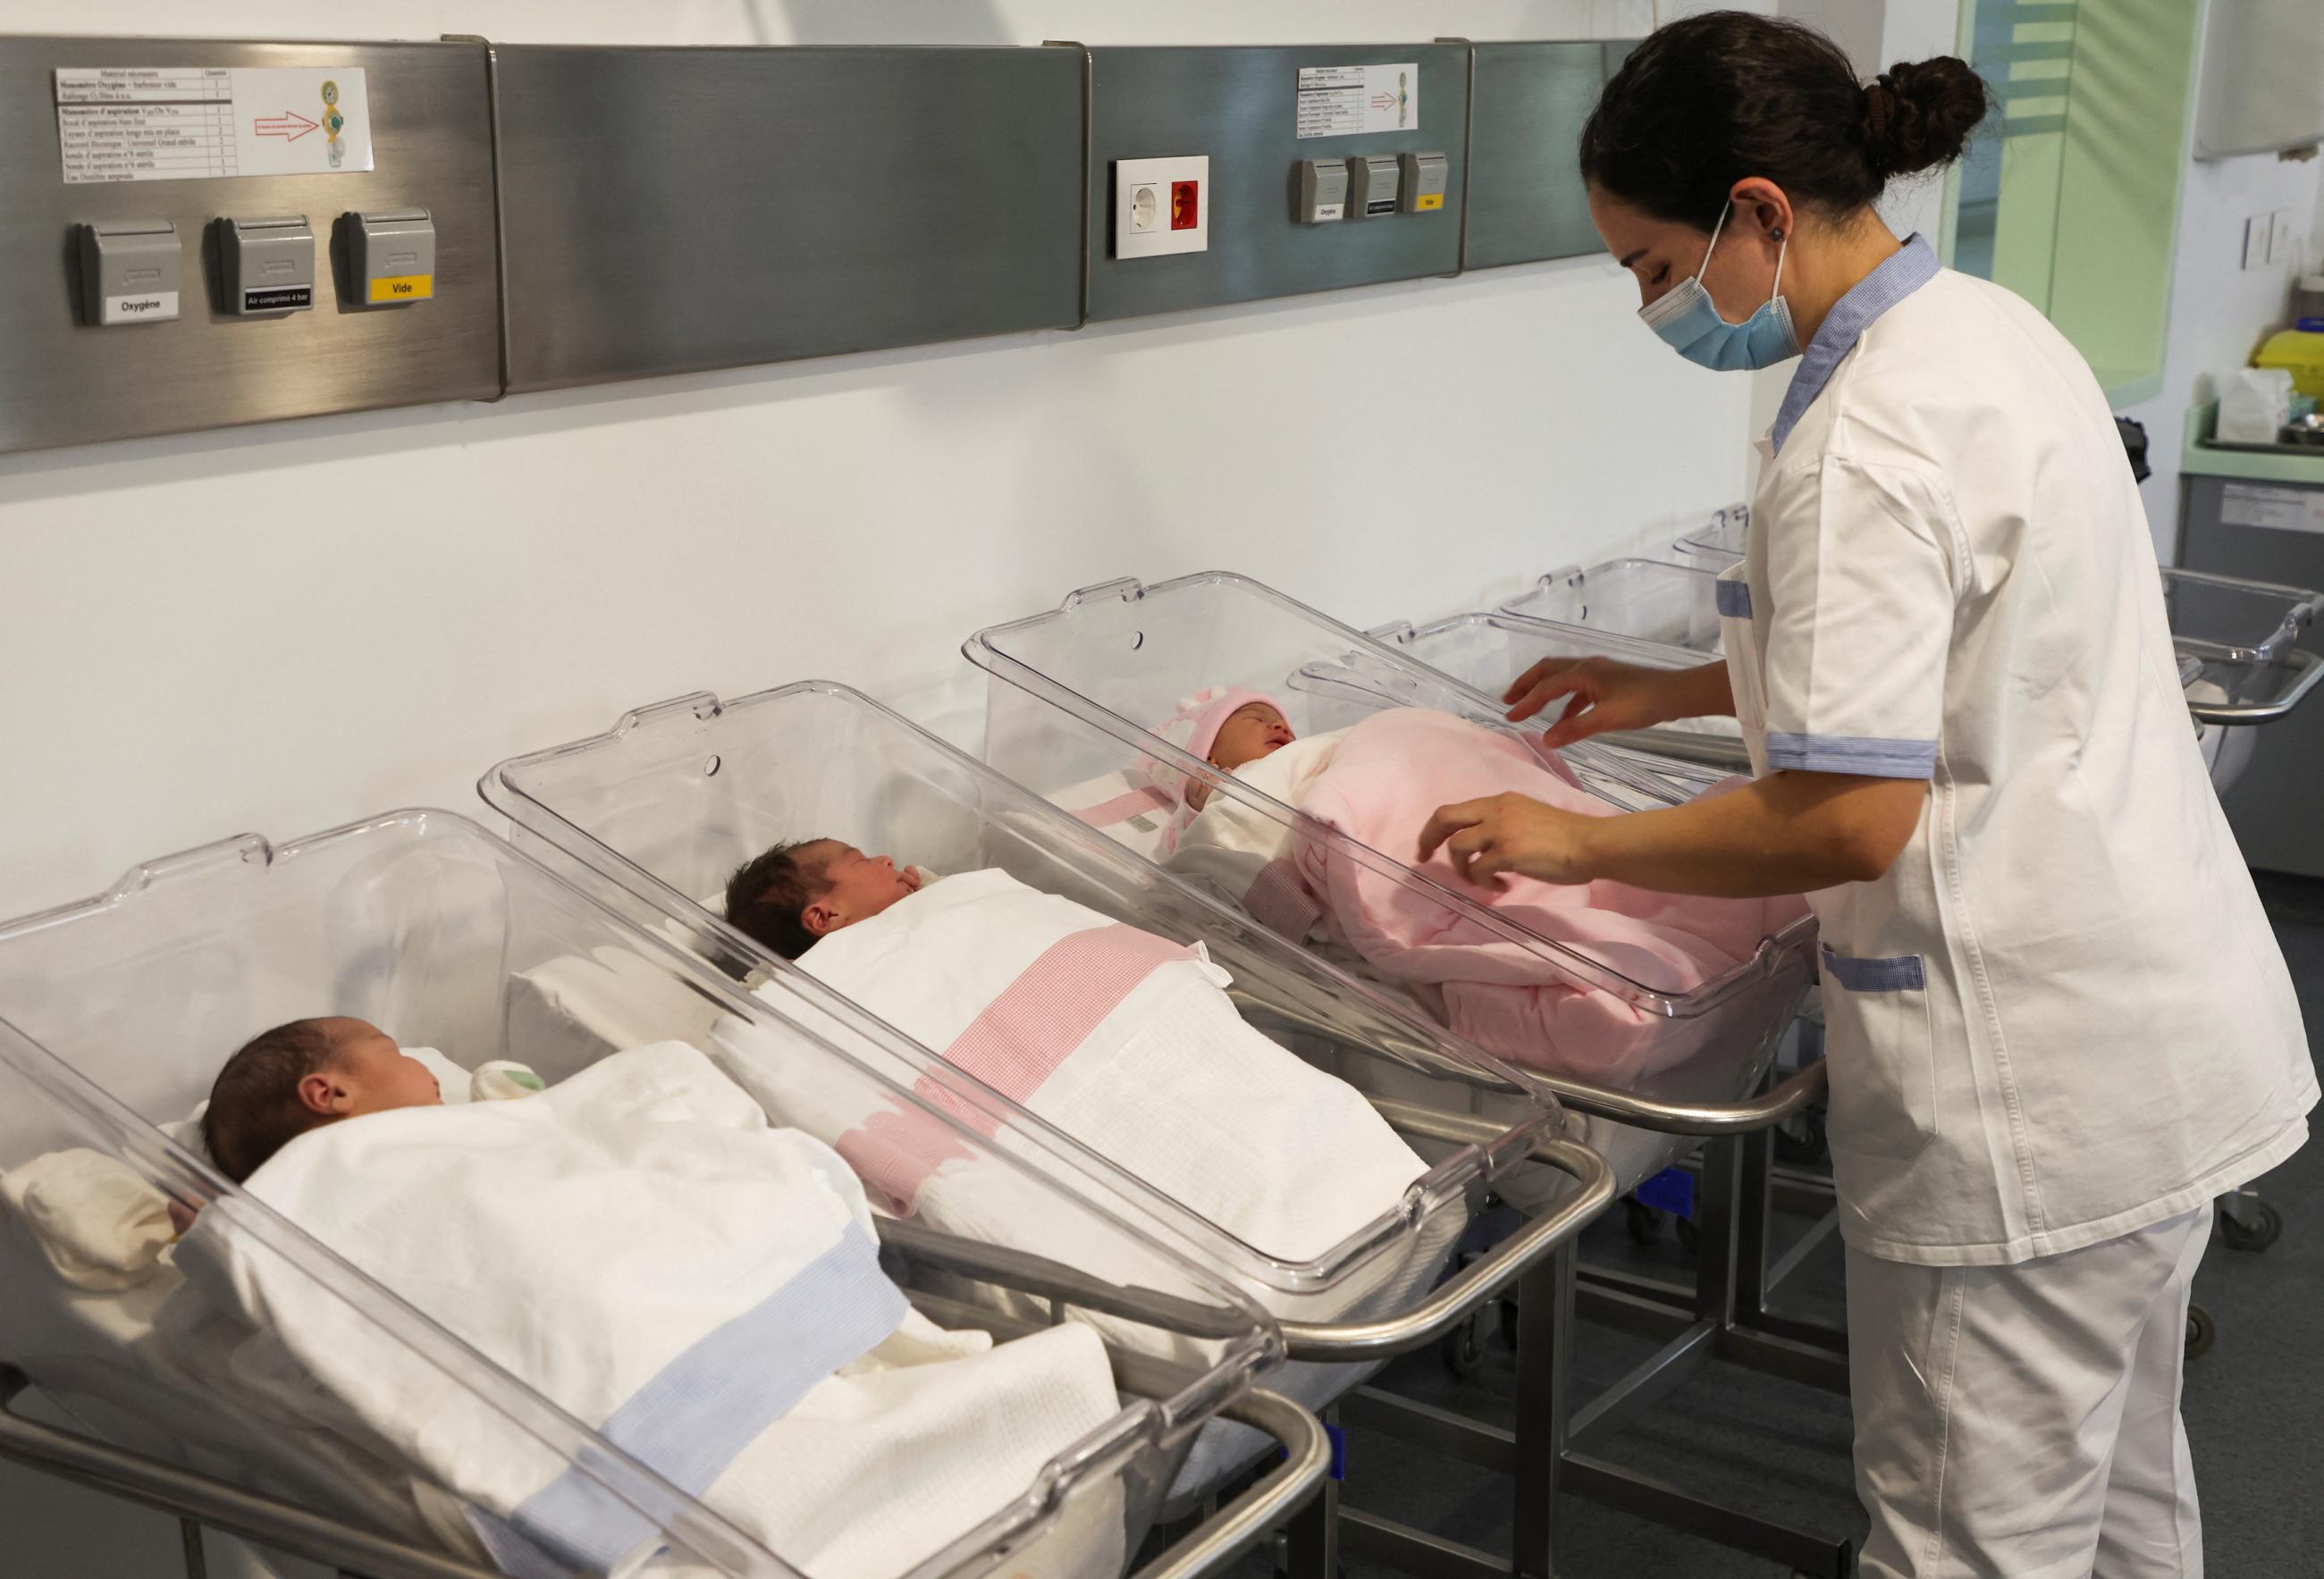 A medical worker stands near newborn babies at Hotel Dieu hospital as the world's population surged past 8 billion, according to the United Nations, in Beirut, Lebanon November 15, 2022.